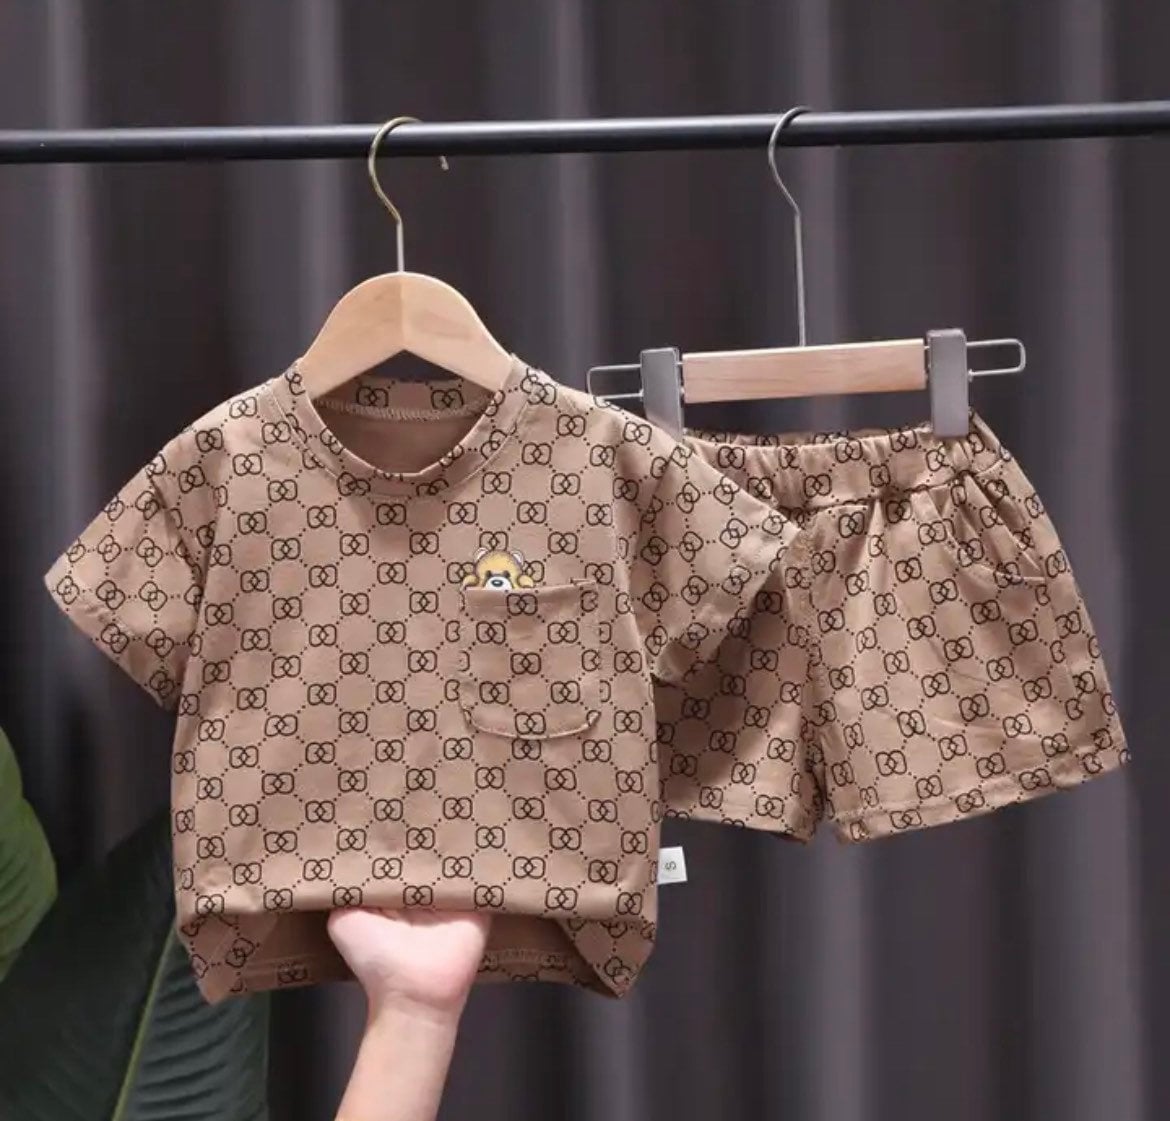 Gucci baby clothes